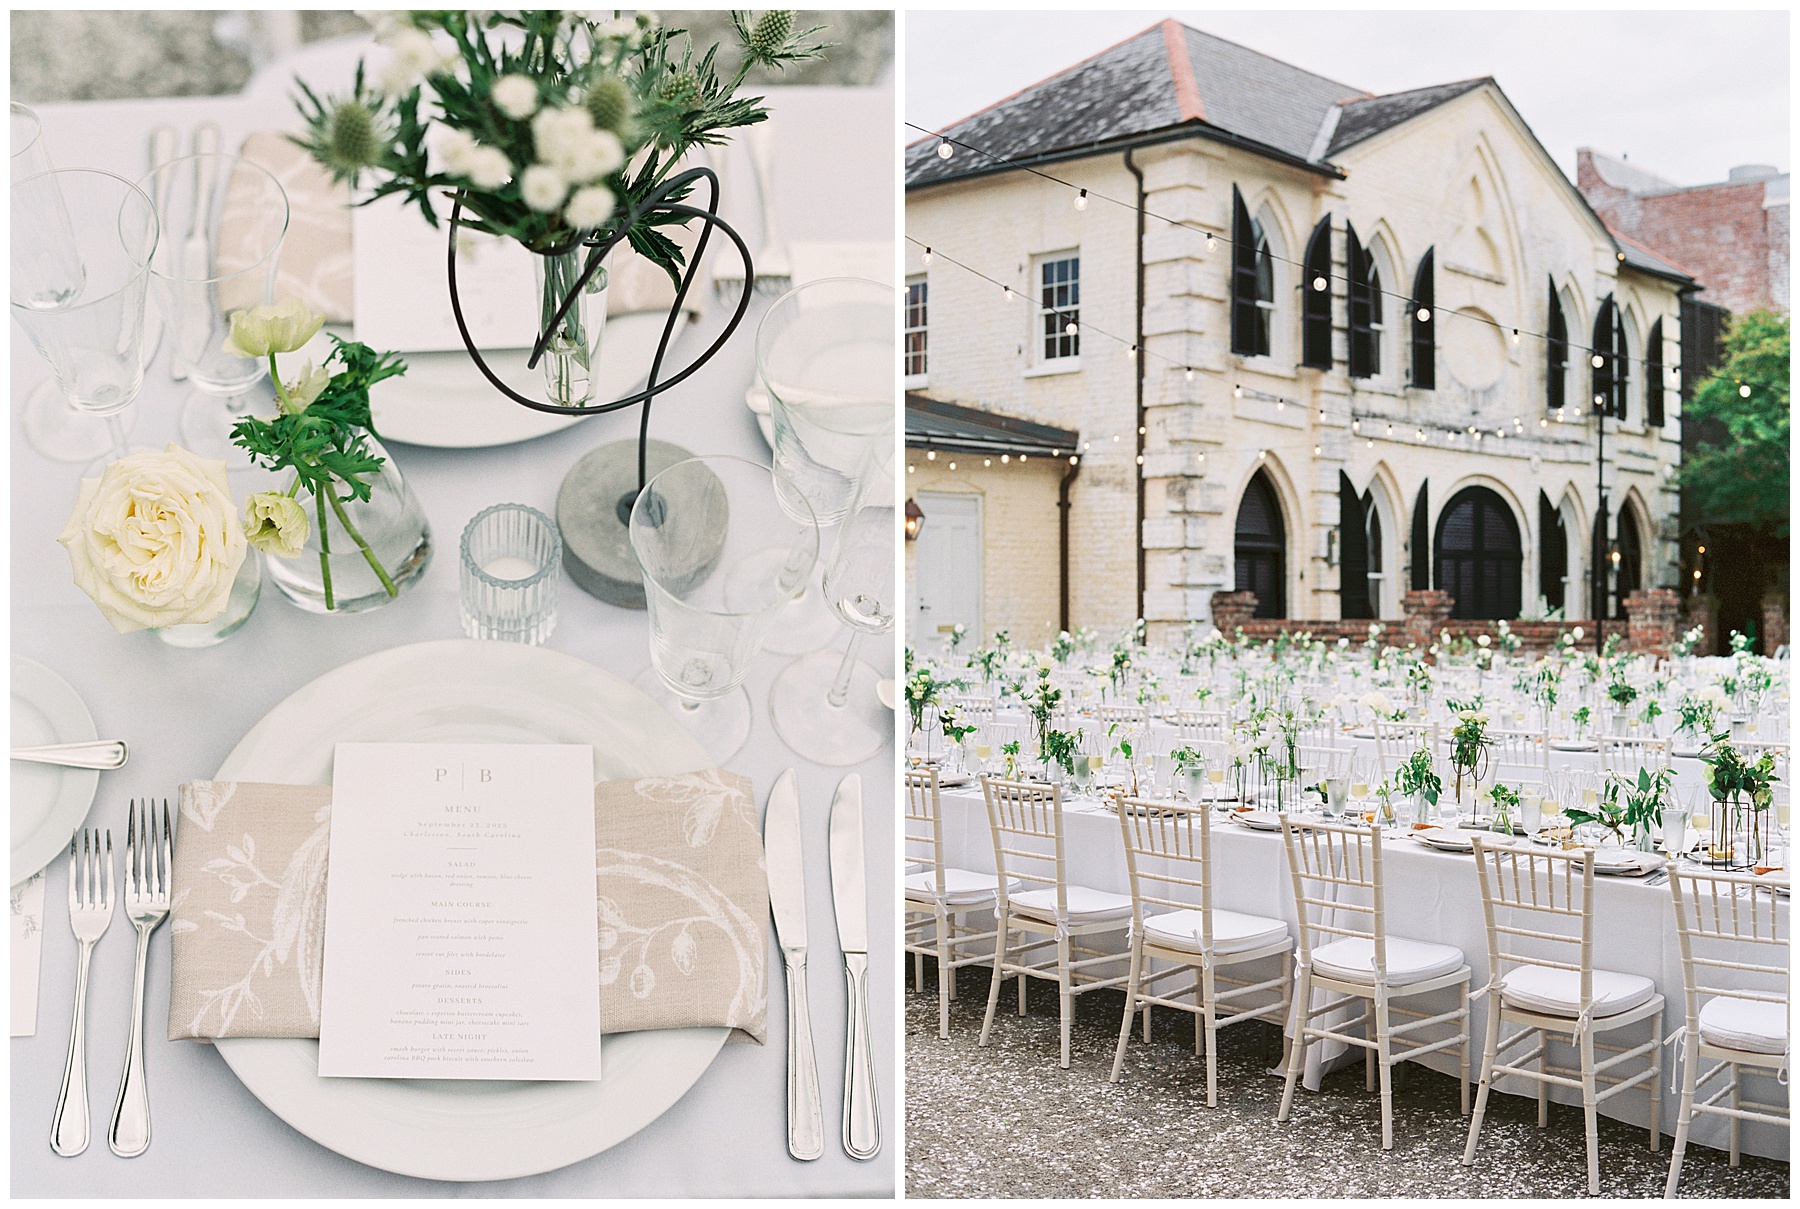 outdoor wedding reception with family style seating with white table cloths and simple white flowers arrangements in the middle 